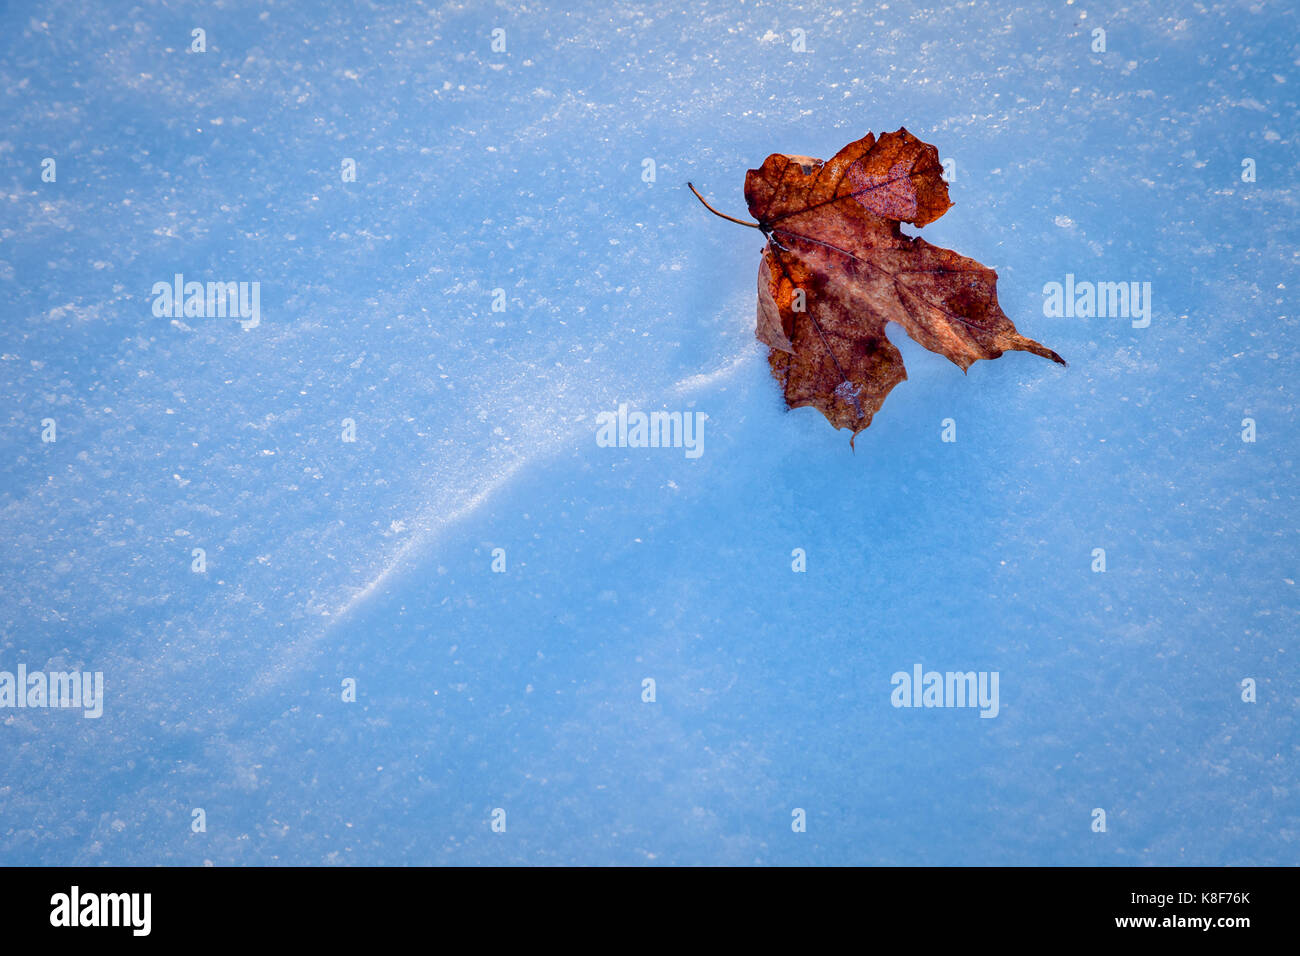 Red Maple leaf on a field of white snow. Stock Photo